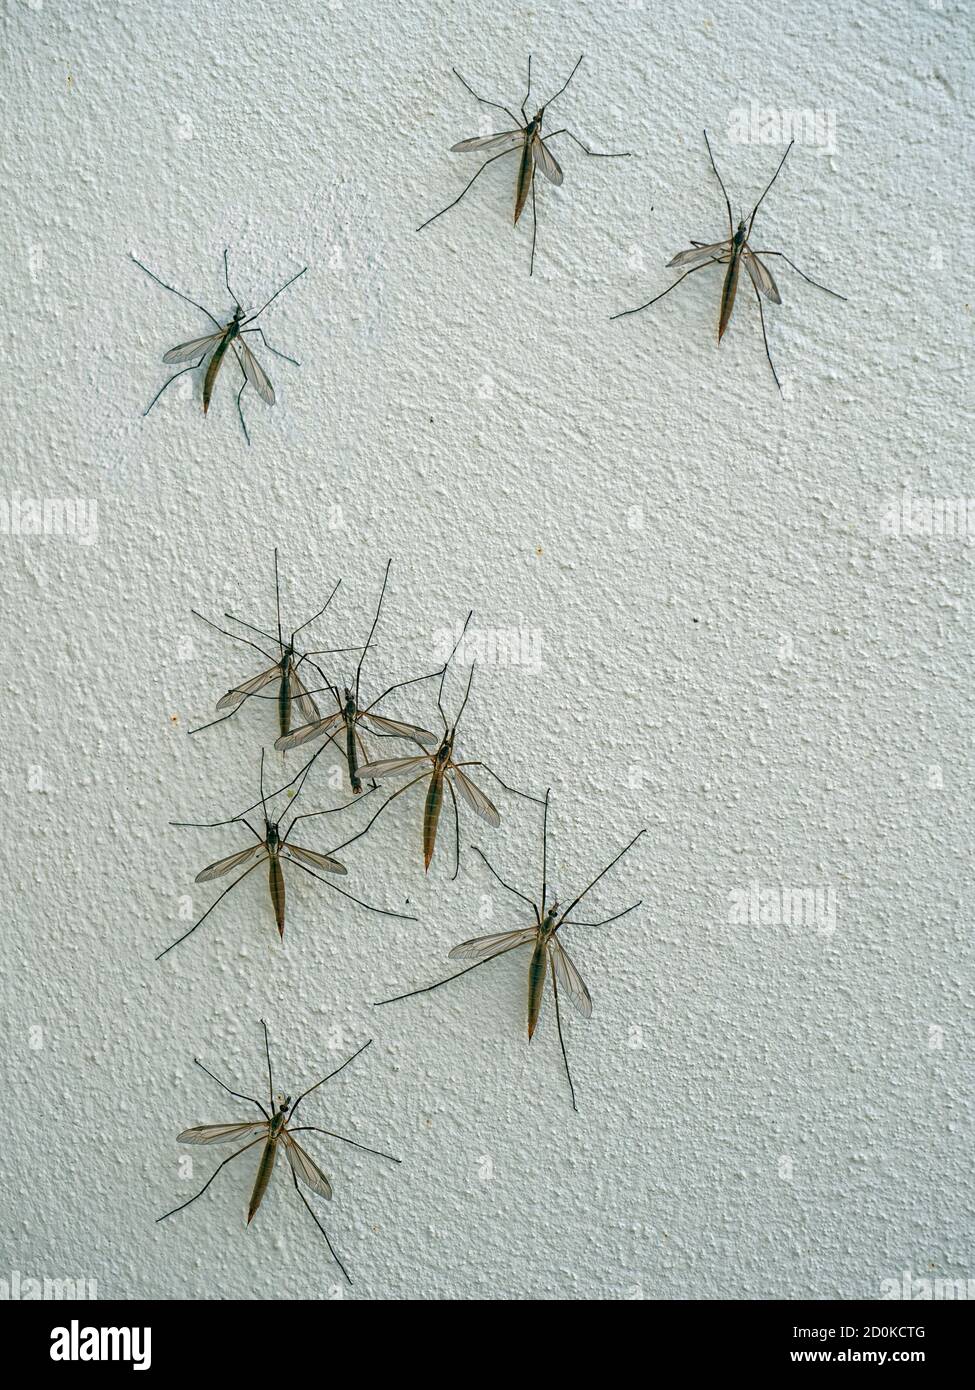 Tipulidae Crane Fly - Daddy Long Legs resting on white wall Stock Photo -  Alamy